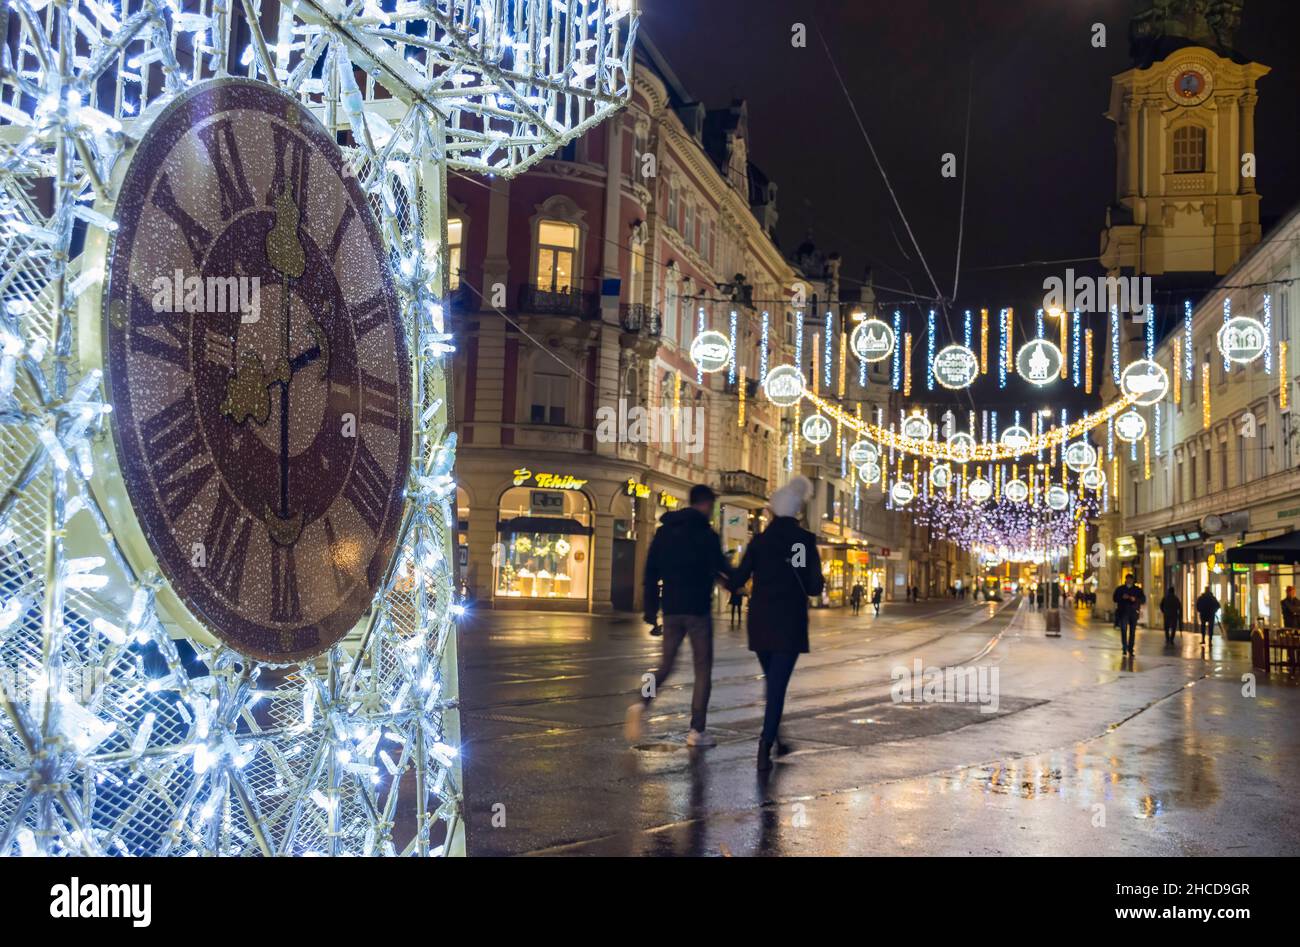 Graz, Austria-December 02, 2021: Beautiful Christmas decorations with famous Clock Tower on Herrengasse street, at night, in the city center of Graz, Stock Photo